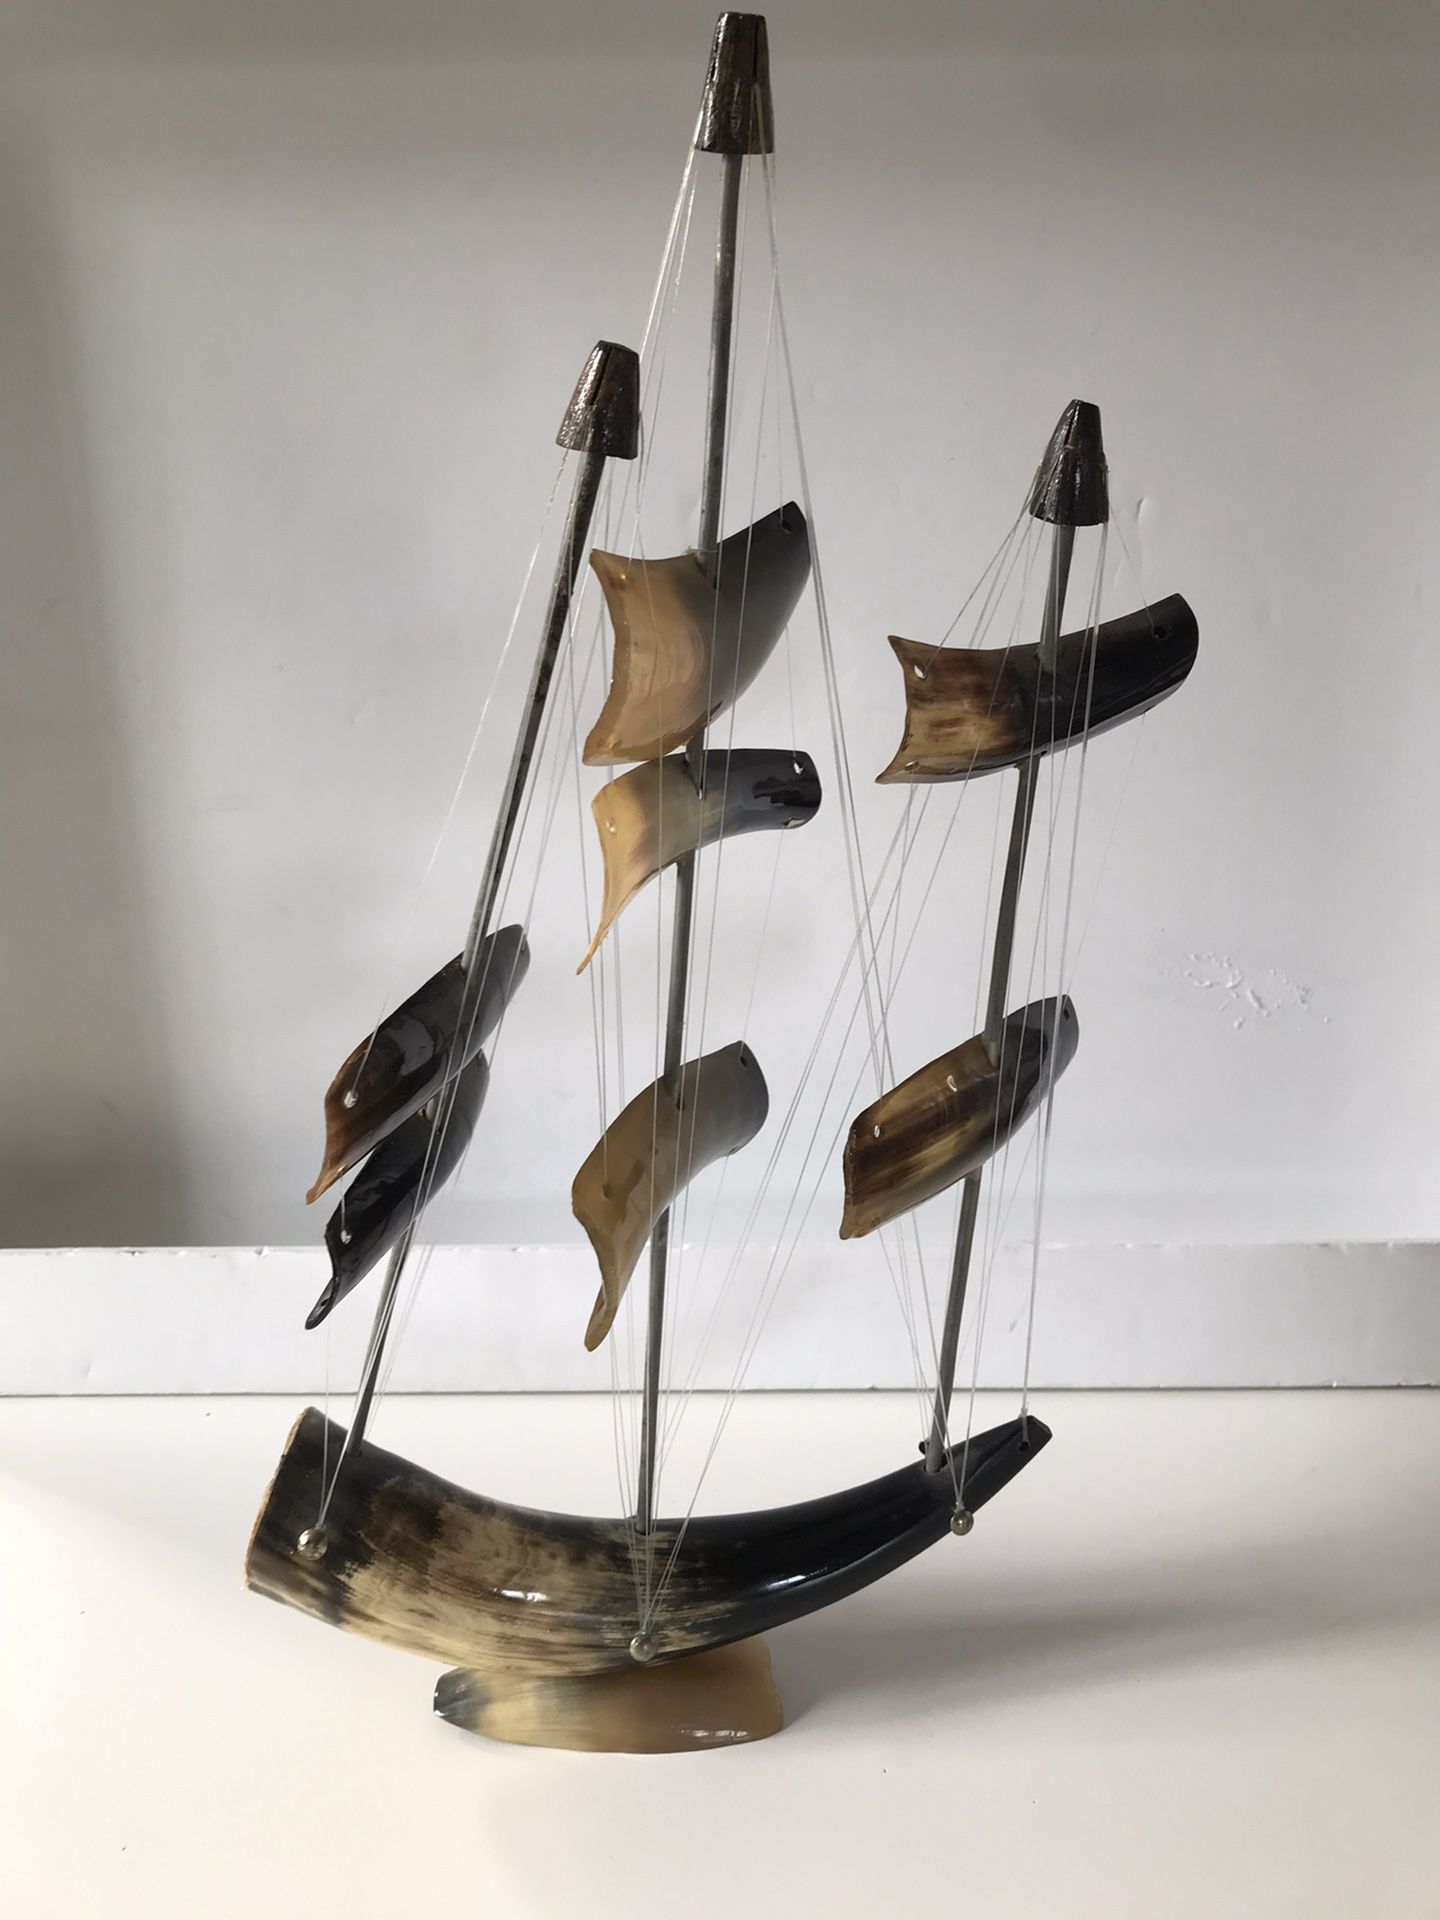 Handcrafted Sail Ship Cow Horn 3 Masts Nautical Decor Souvenir. Height 18in, length 10in.